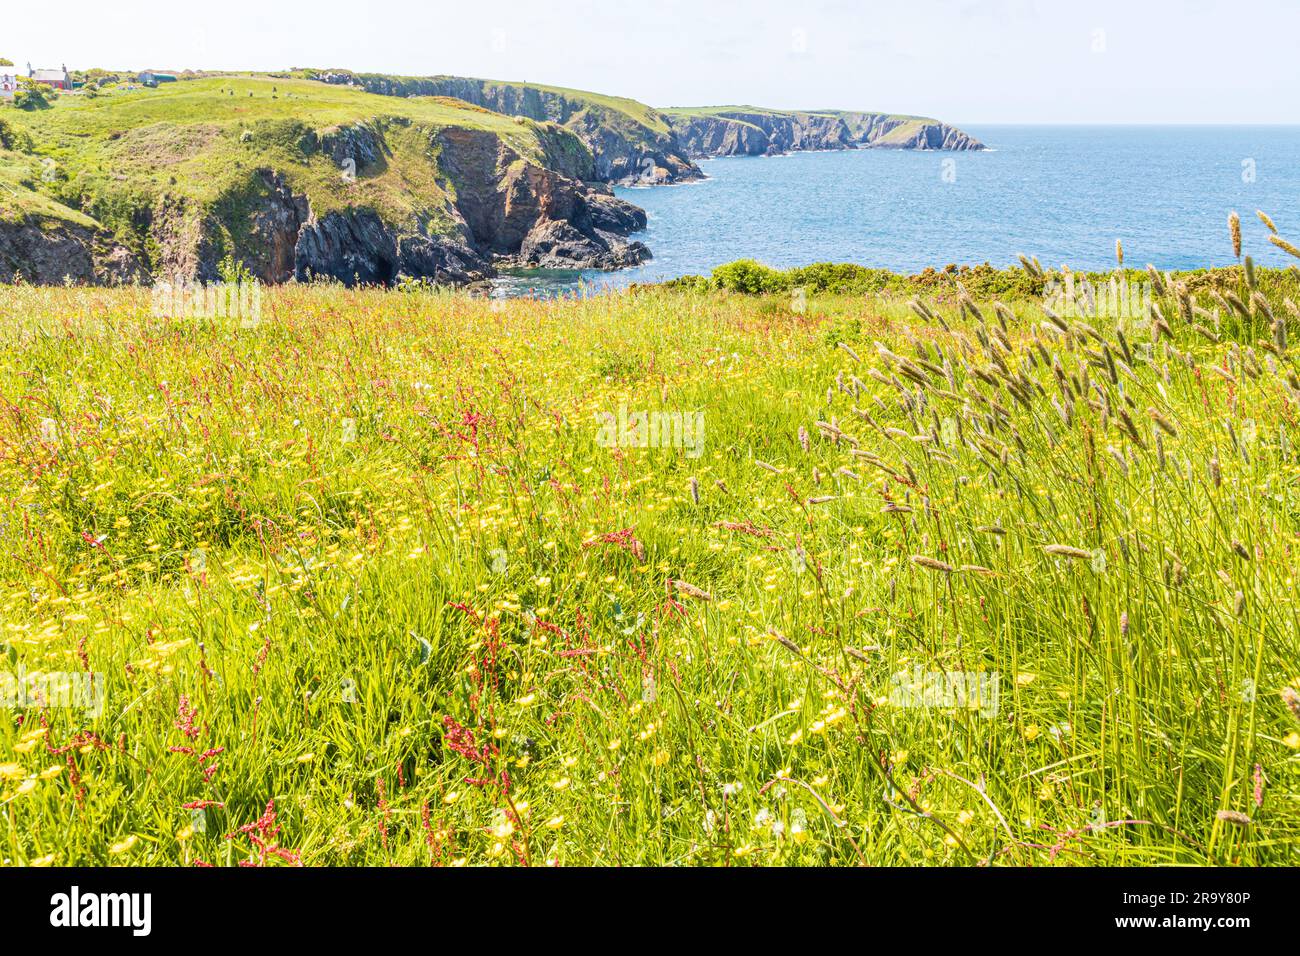 Mixed wild grasses on the cliffs beside the Pembrokeshire Coast Path National Trail at Trefin (Trevine) in the Pembrokeshire Coast National Park, Wale Stock Photo